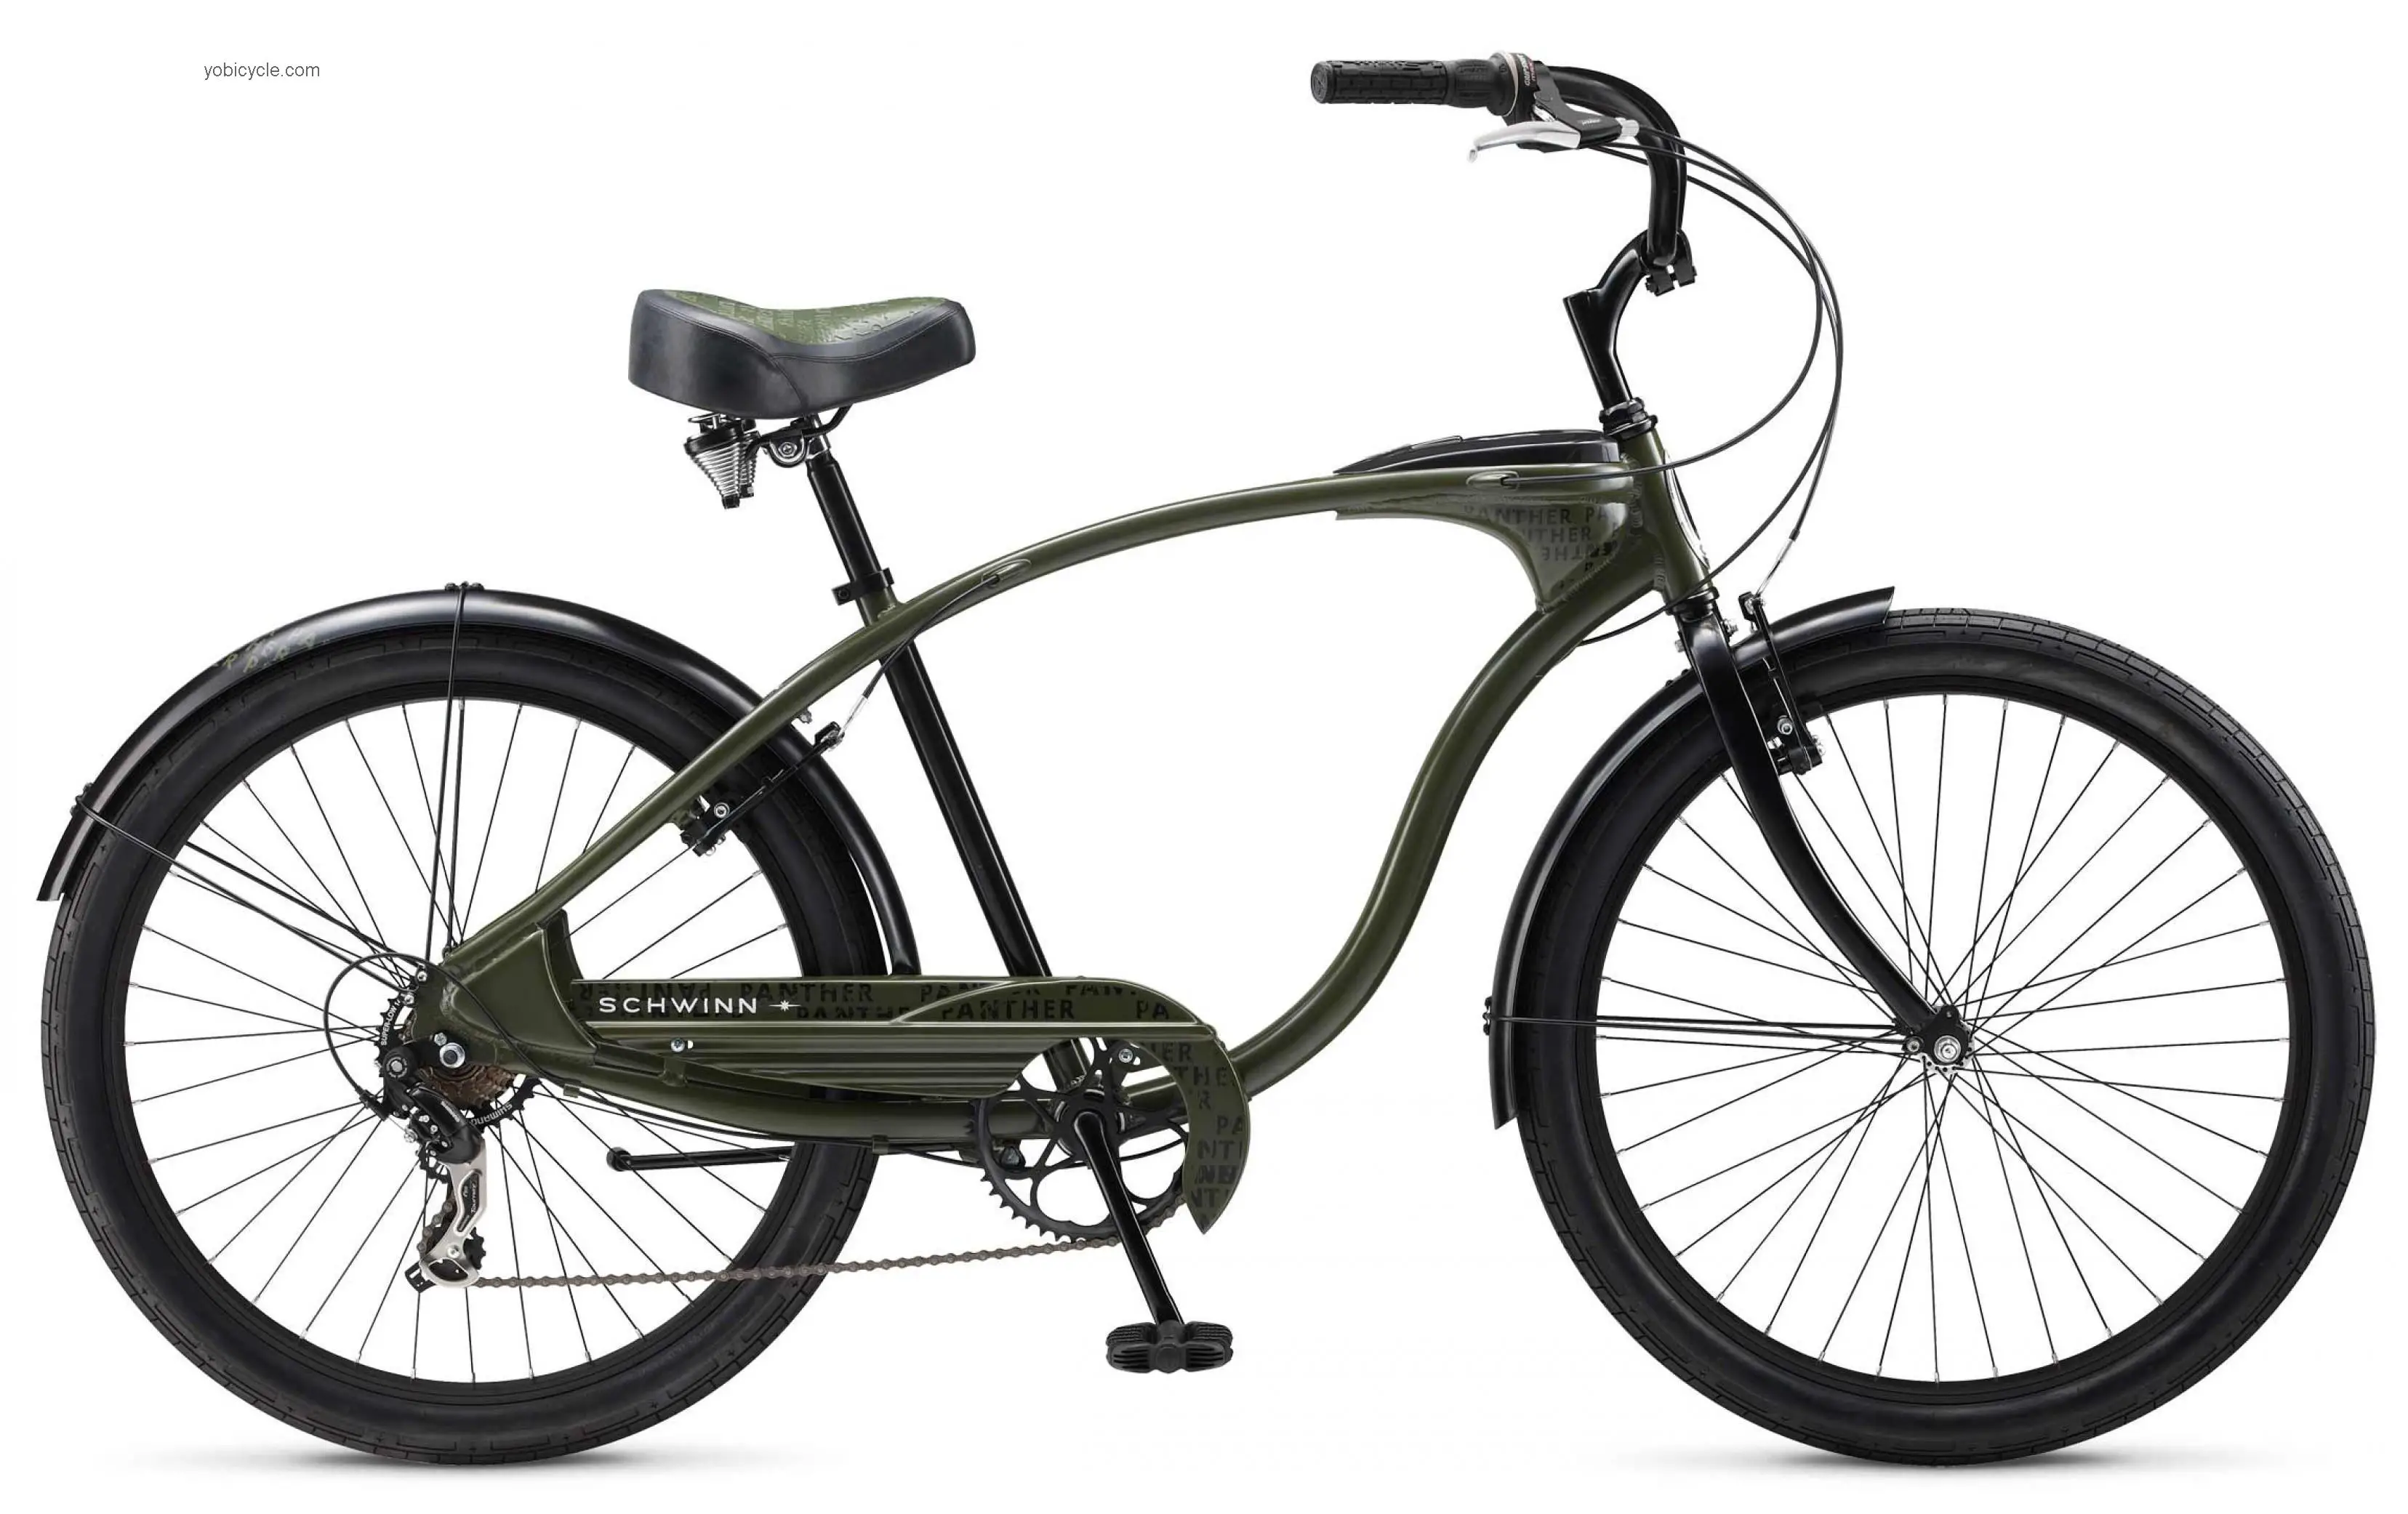 Schwinn Panther 2013 comparison online with competitors